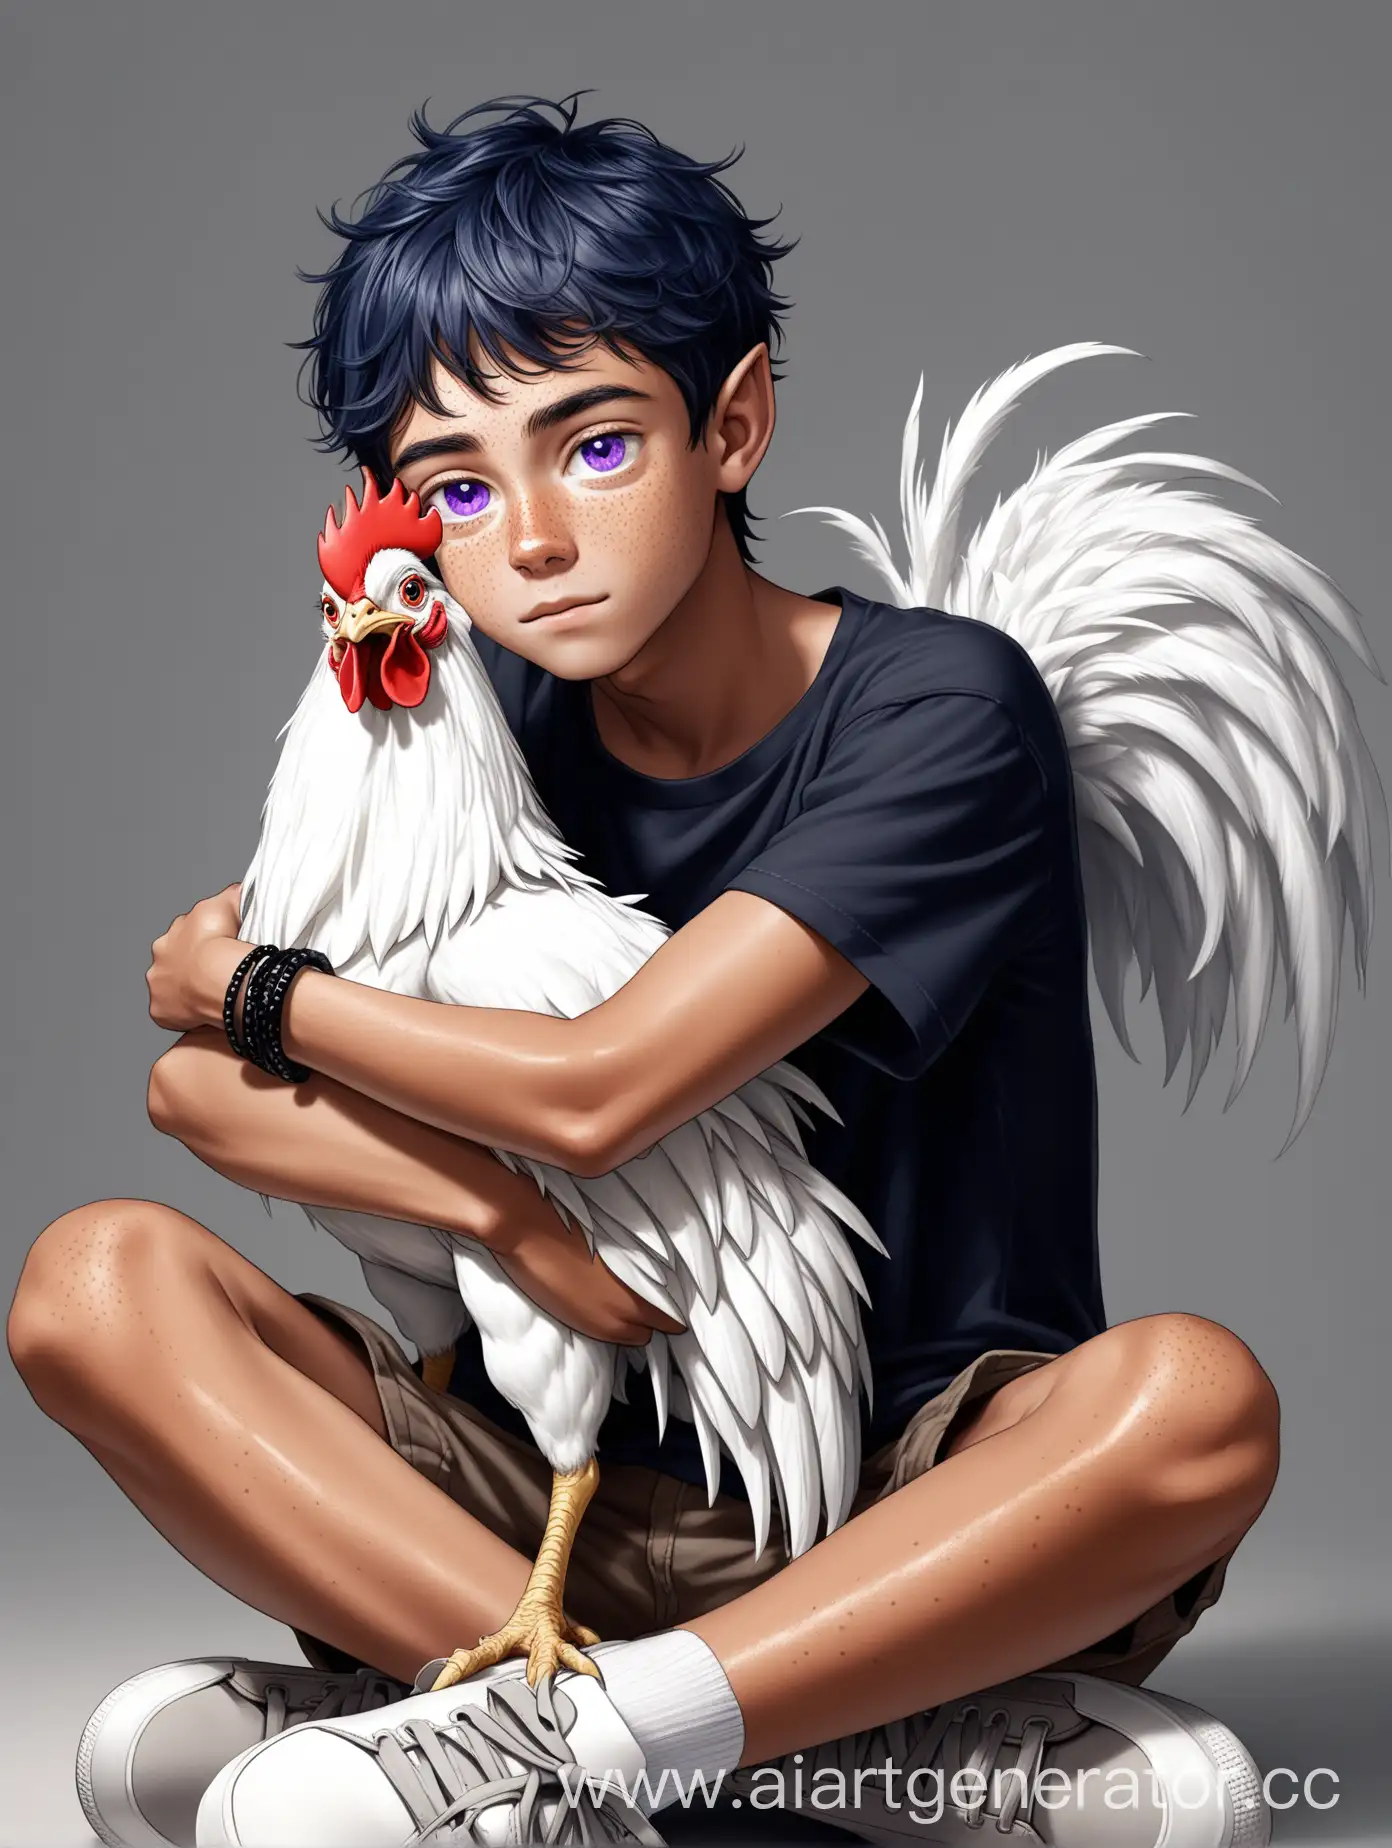 Teenage-Boy-with-Elven-Features-Hugging-and-Kissing-Beloved-White-Rooster